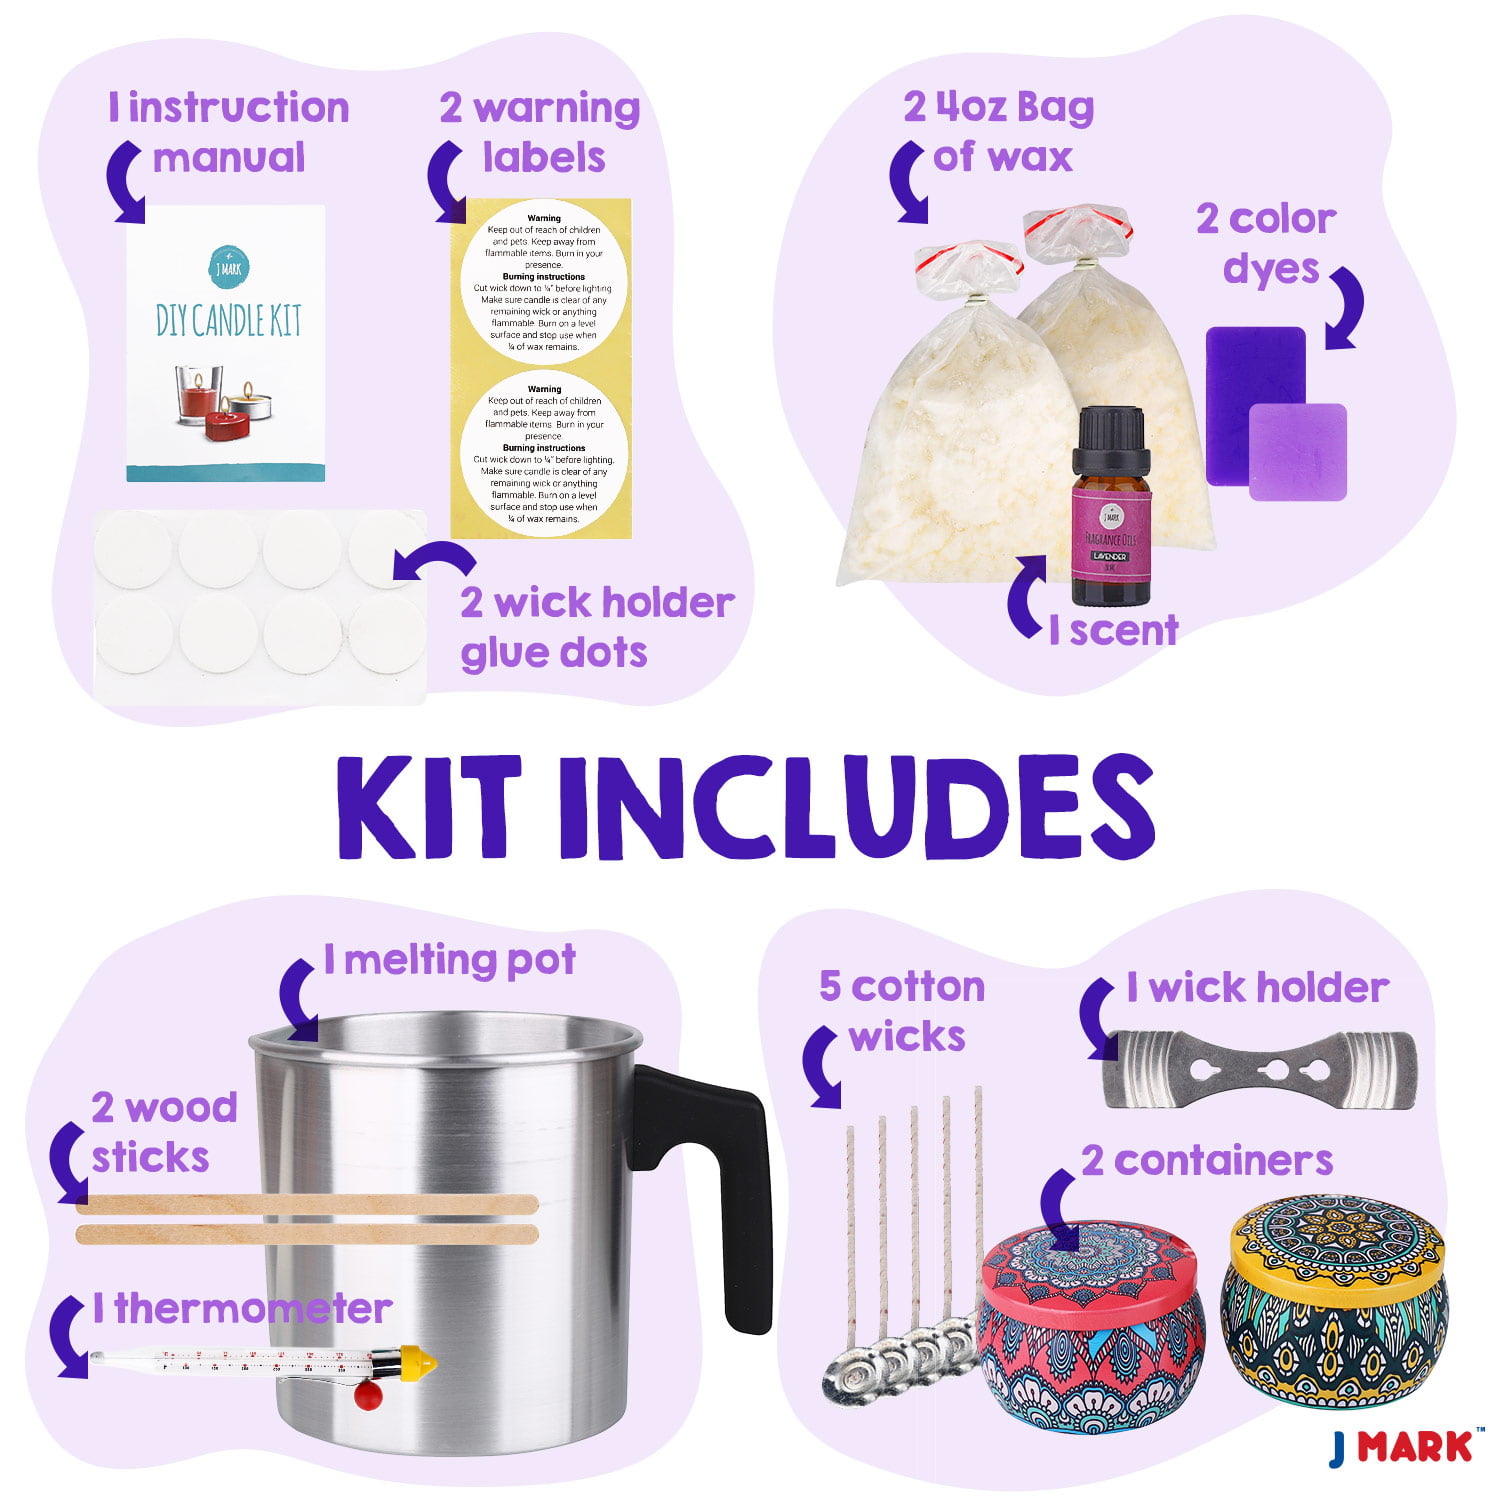 J Mark DIY Candle Making Kit for Adults – All Inclusive with Tins, Wax, Dye, Fragrance Oils and More